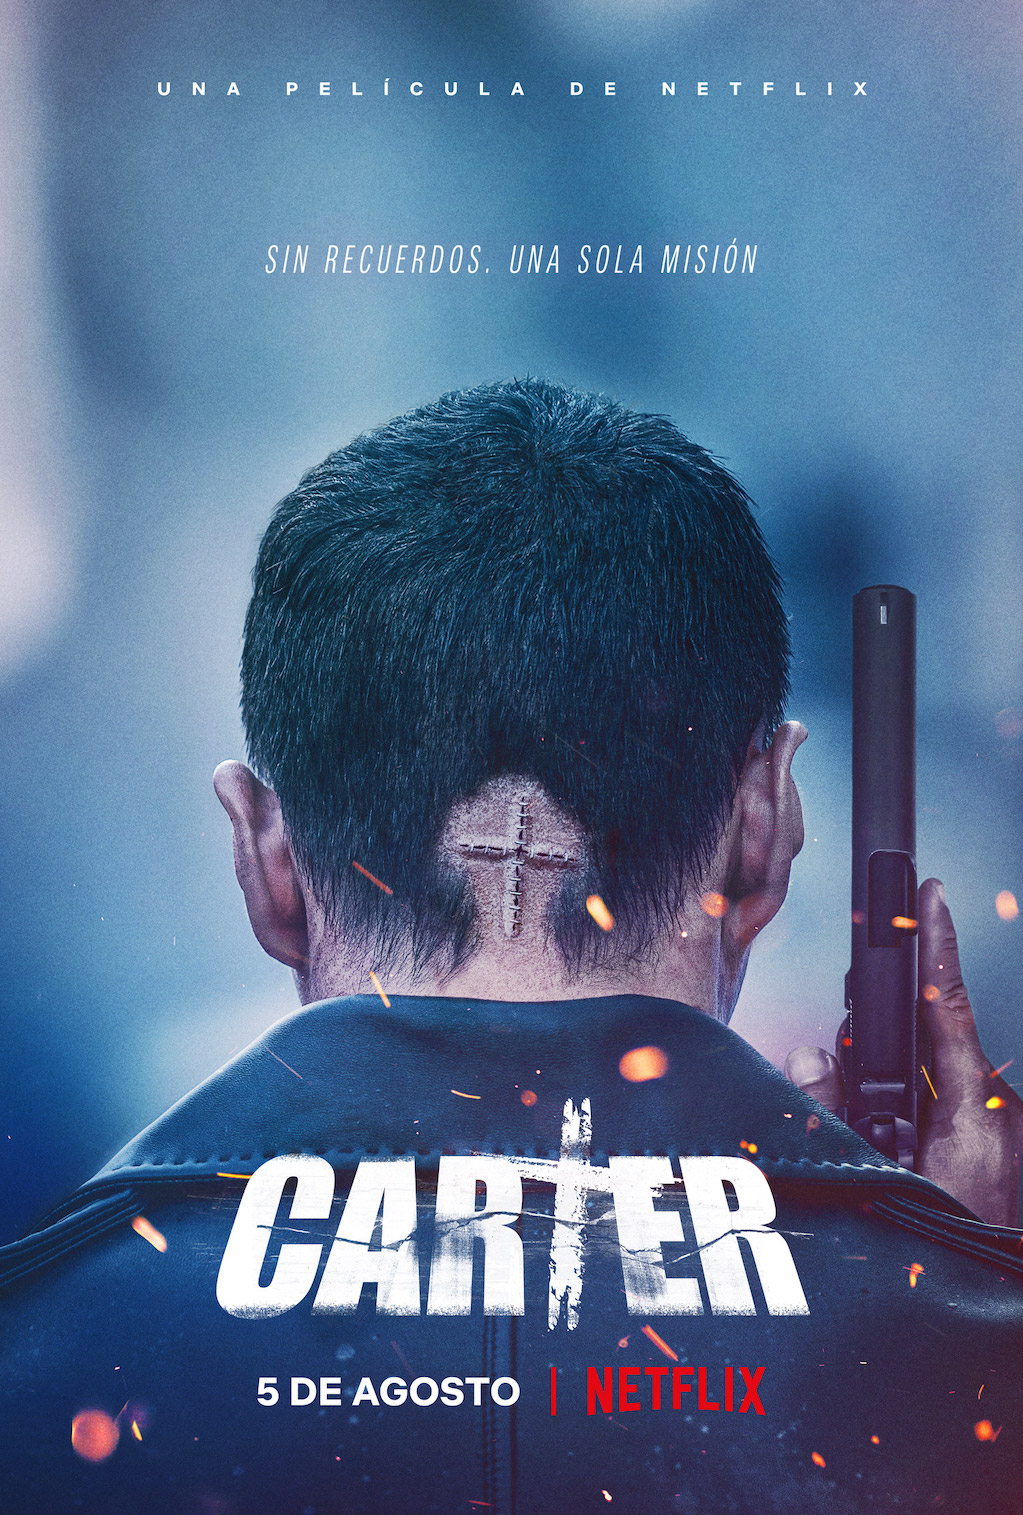 What time is Carter coming to Netflix?